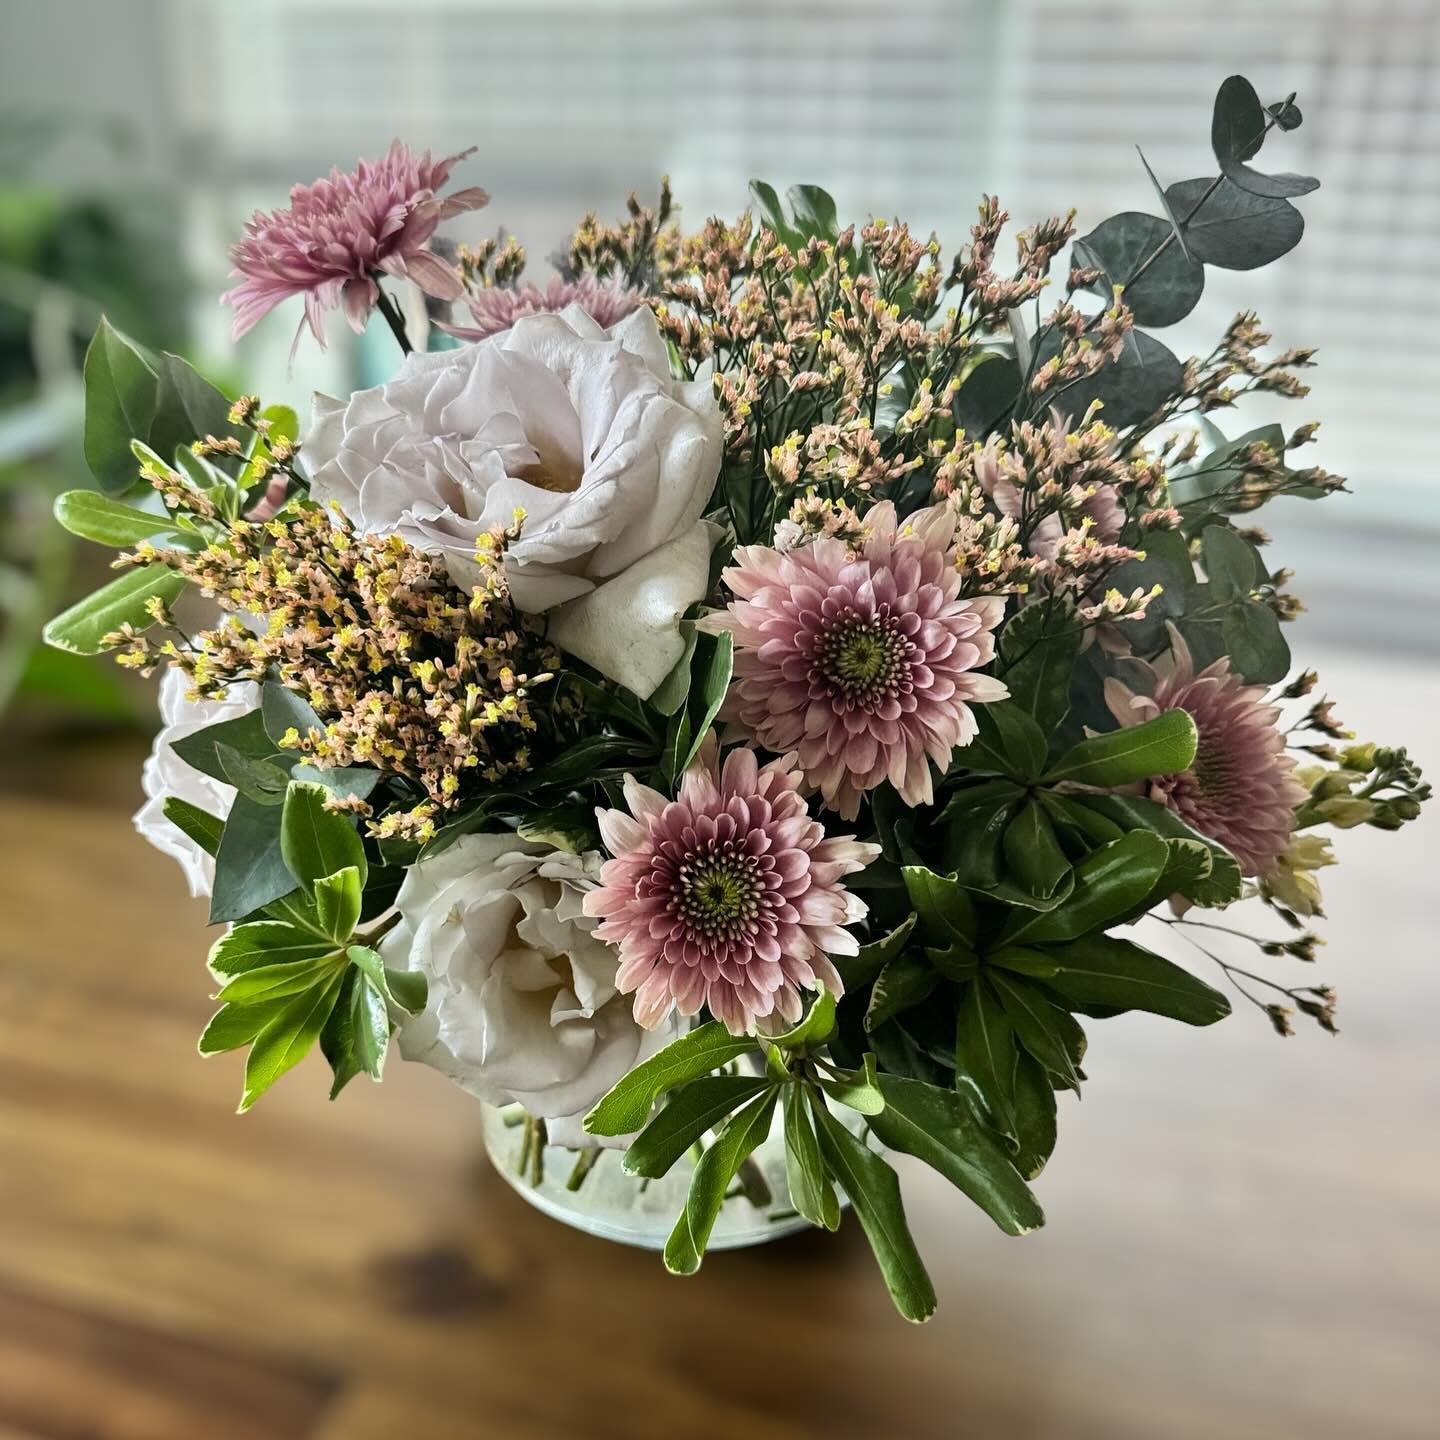 It&rsquo;s spring, baby. And she pretty in pink.

You&rsquo;re looking at a prototype for a job &mdash; white roses, dark pink mums, sea lavender, variegated pittosporum, and eucalyptus. It smells dreamy!

#austinflowers #texasflowers #atxflorist #au